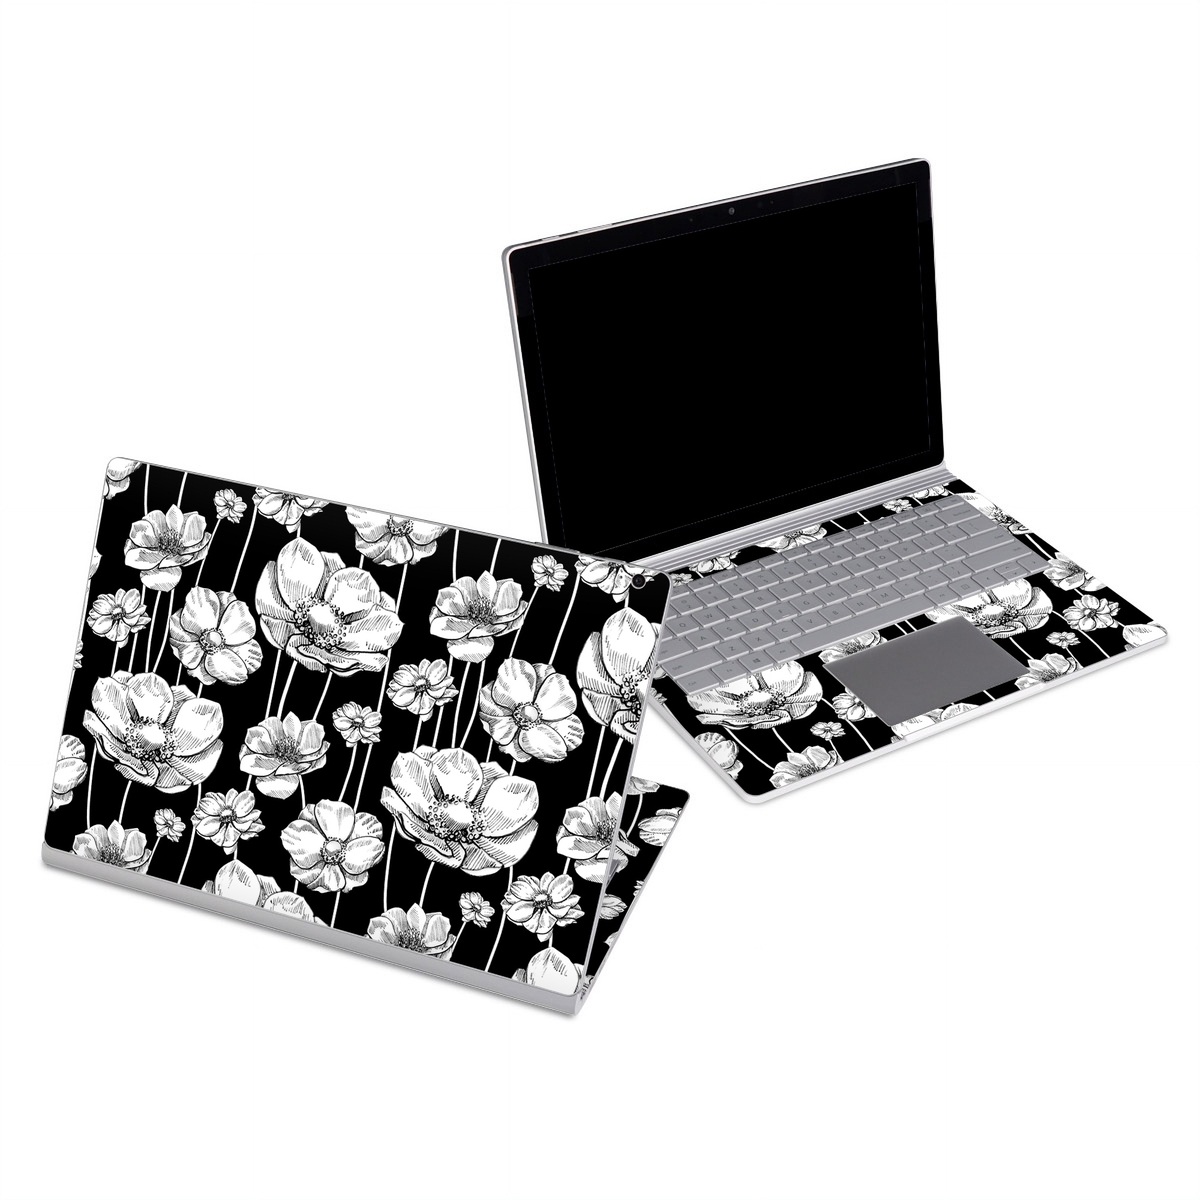 Microsoft Surface Book Series Skin design of Flower, Black-and-white, Plant, Botany, Petal, Design, Wildflower, Monochrome photography, Pattern, Monochrome, with black, gray, white colors